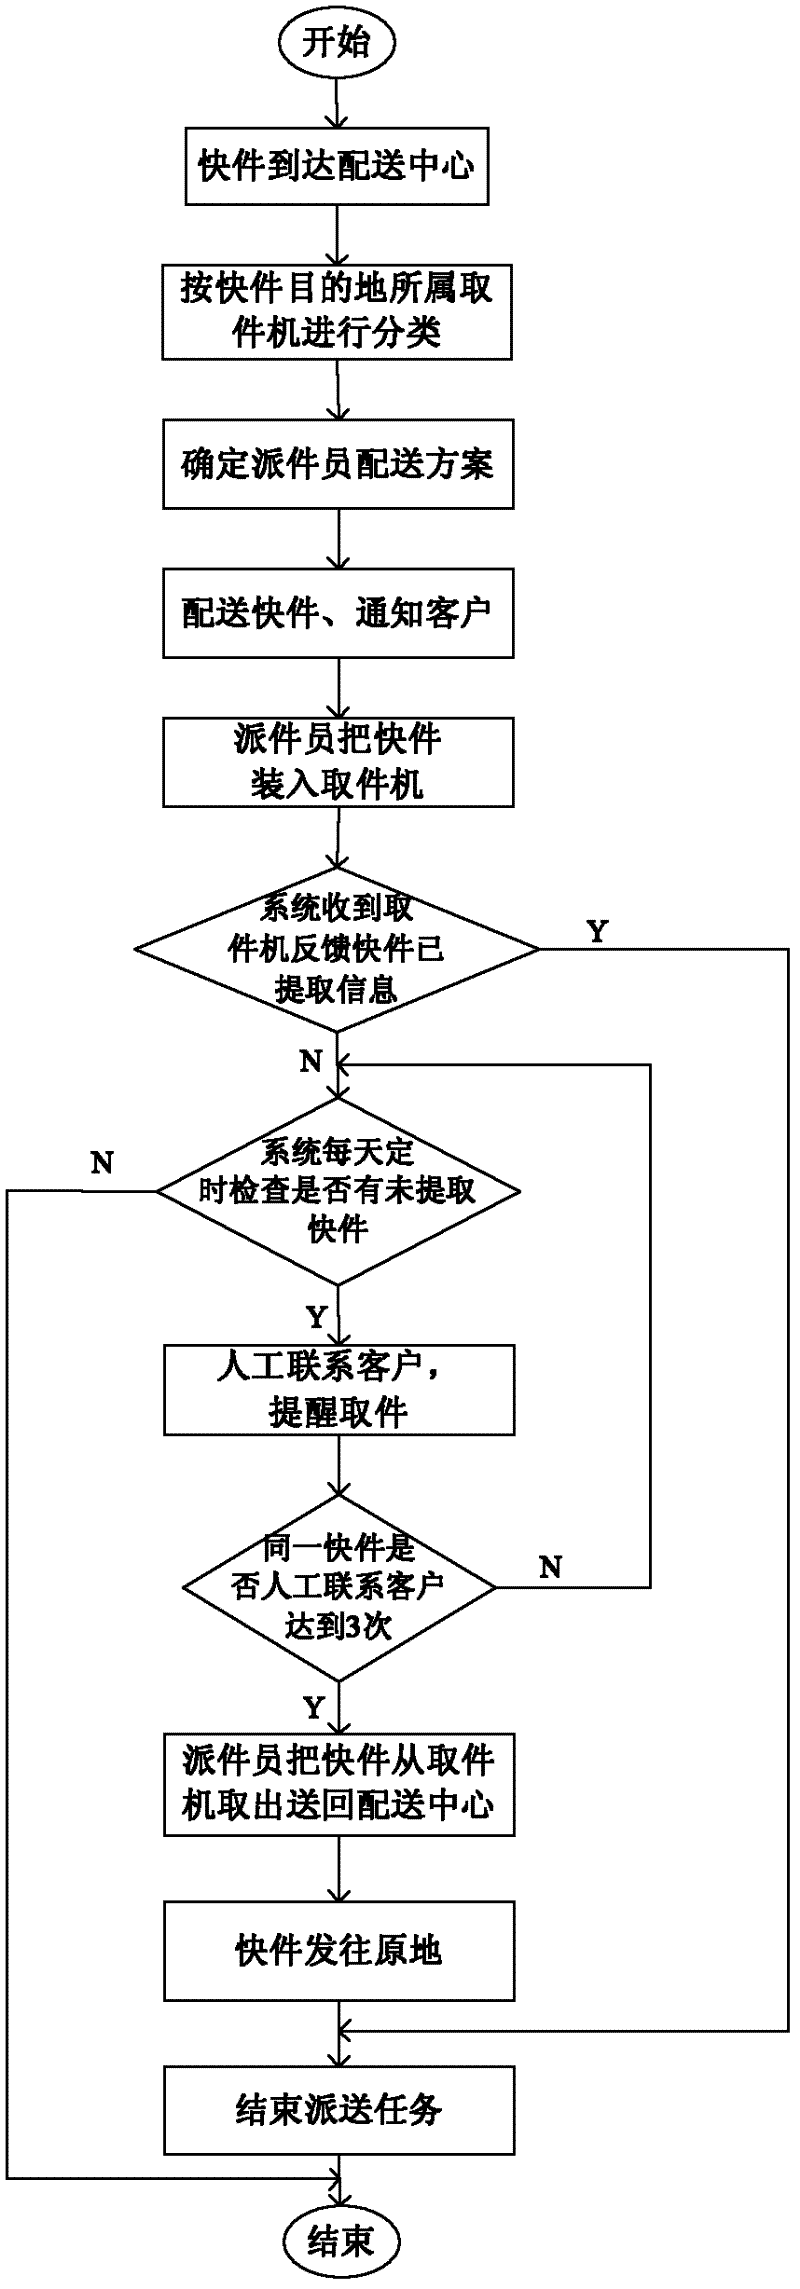 Construction optimizing and operating method of automatic fixed-point picking-up system of logistics express